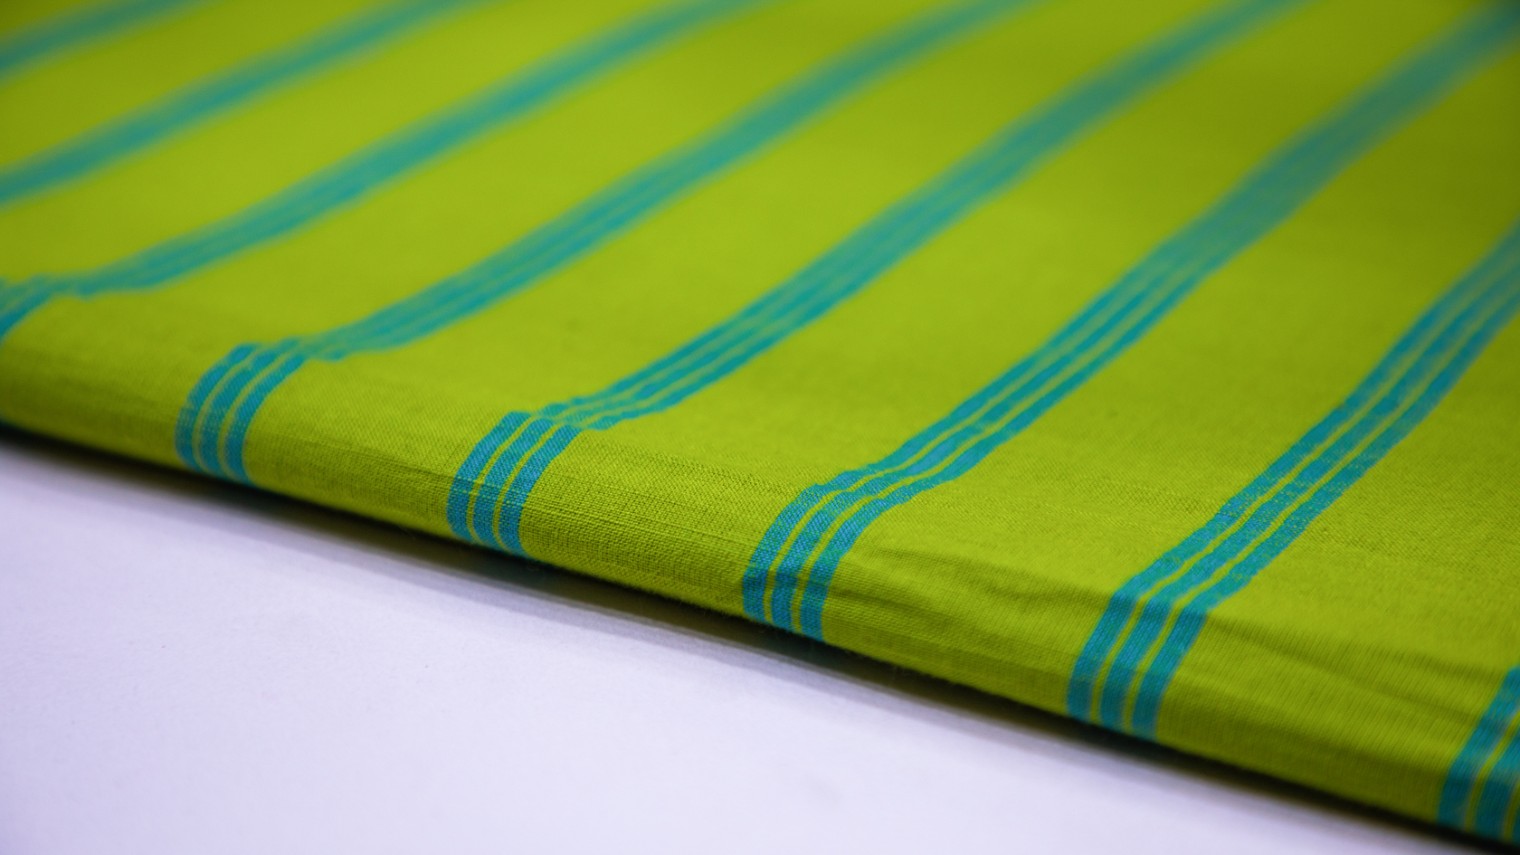 Bright Olive Green Color South Cotton Handloom Blue Stripes Weave Fabric - 4281